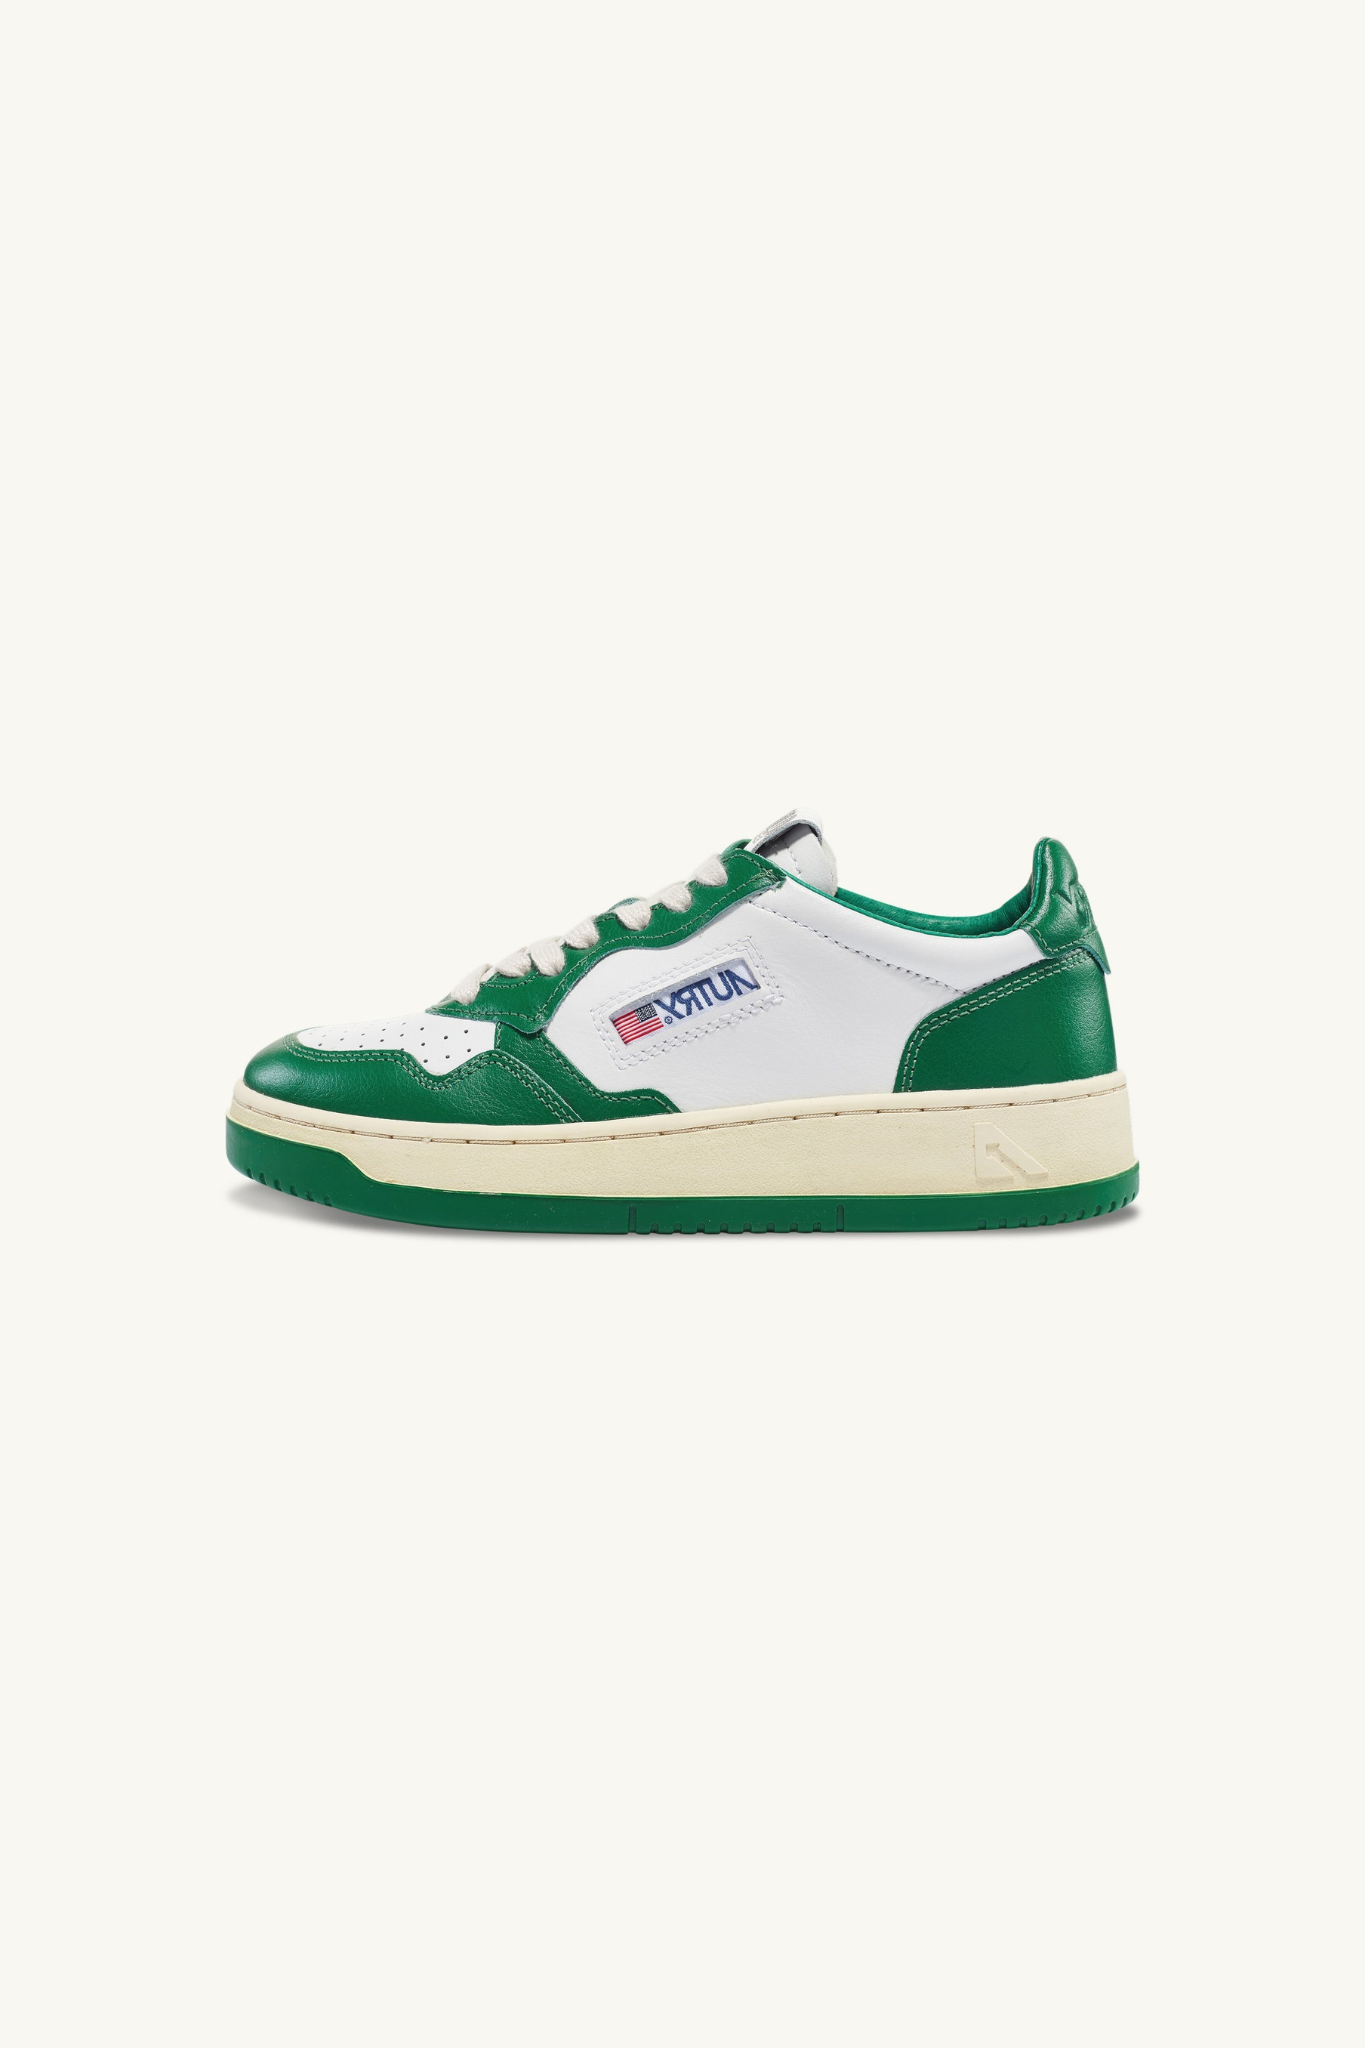 AULM-WB03 - MEDALIST LOW SNEAKERS IN TWO-TONE LEATHER COLOR WHITE AND GREEN